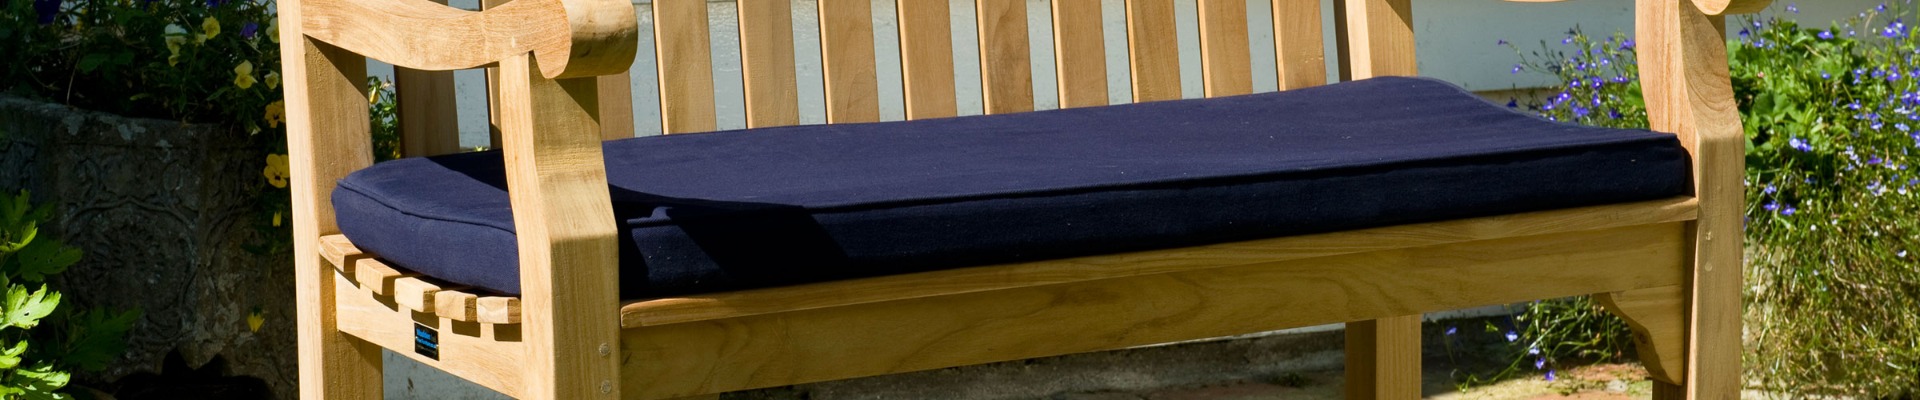 Outdoor Bench Seat Cushions